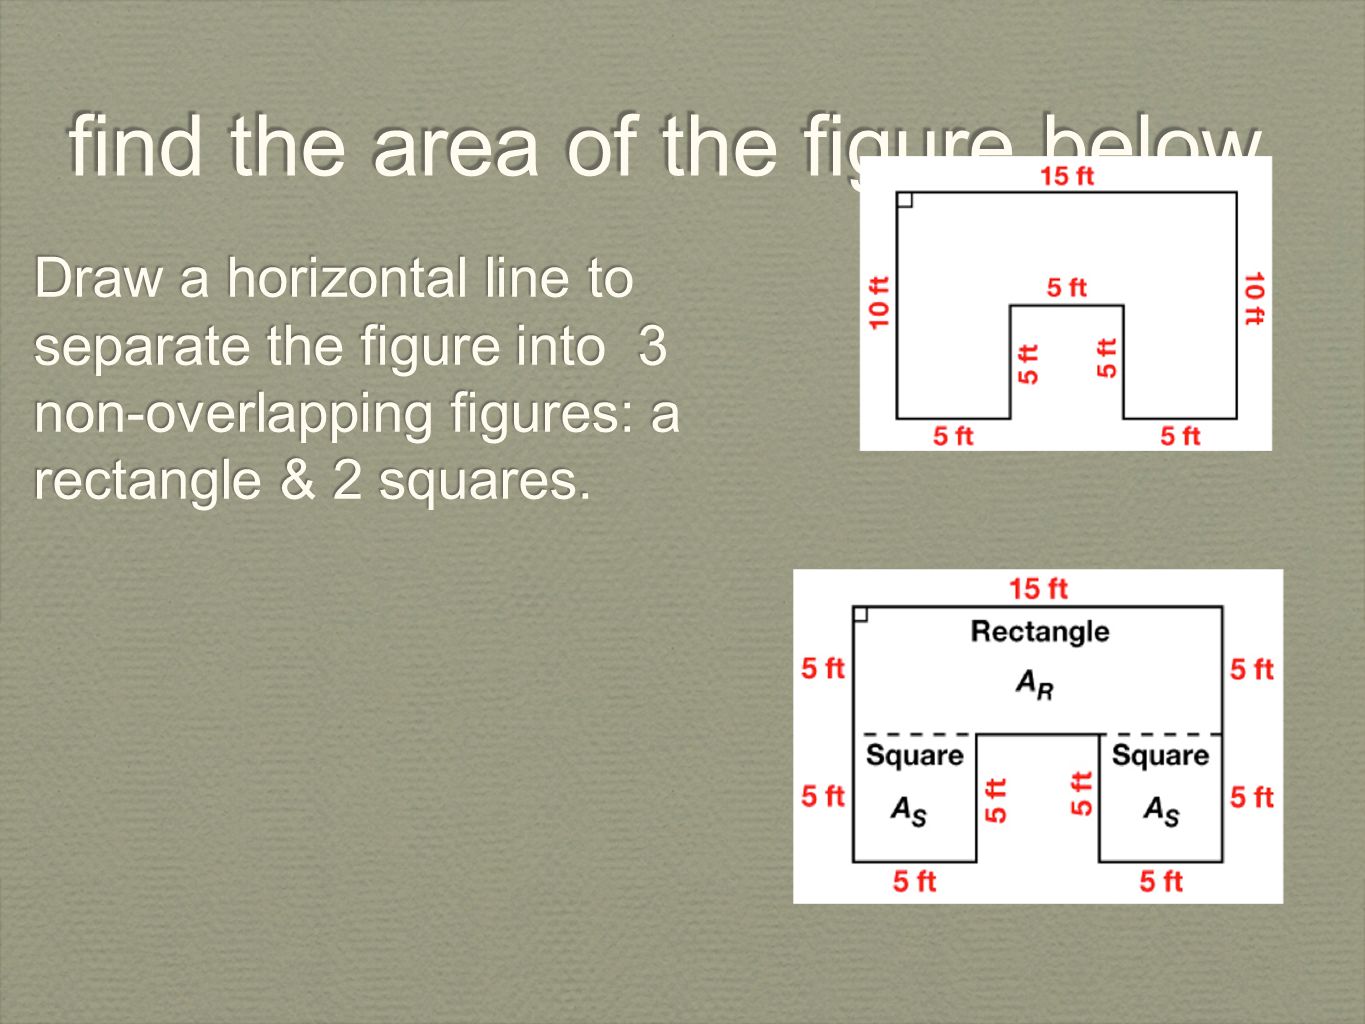 find the area of the figure below